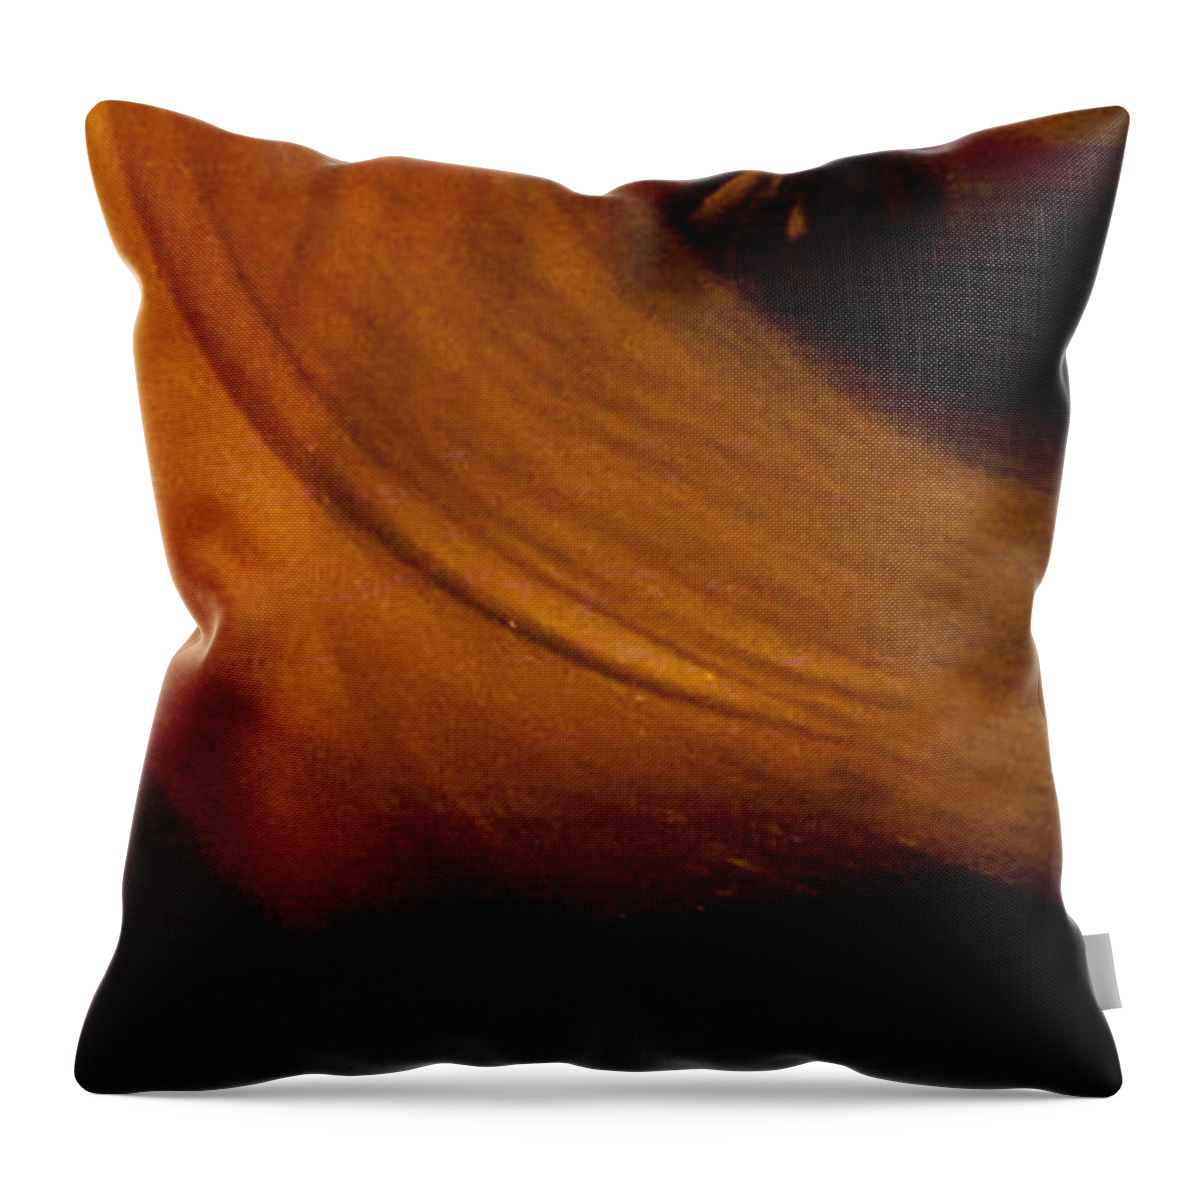 Acrilyc Prints Throw Pillow featuring the photograph Flamenco Series 16 by Catherine Sobredo